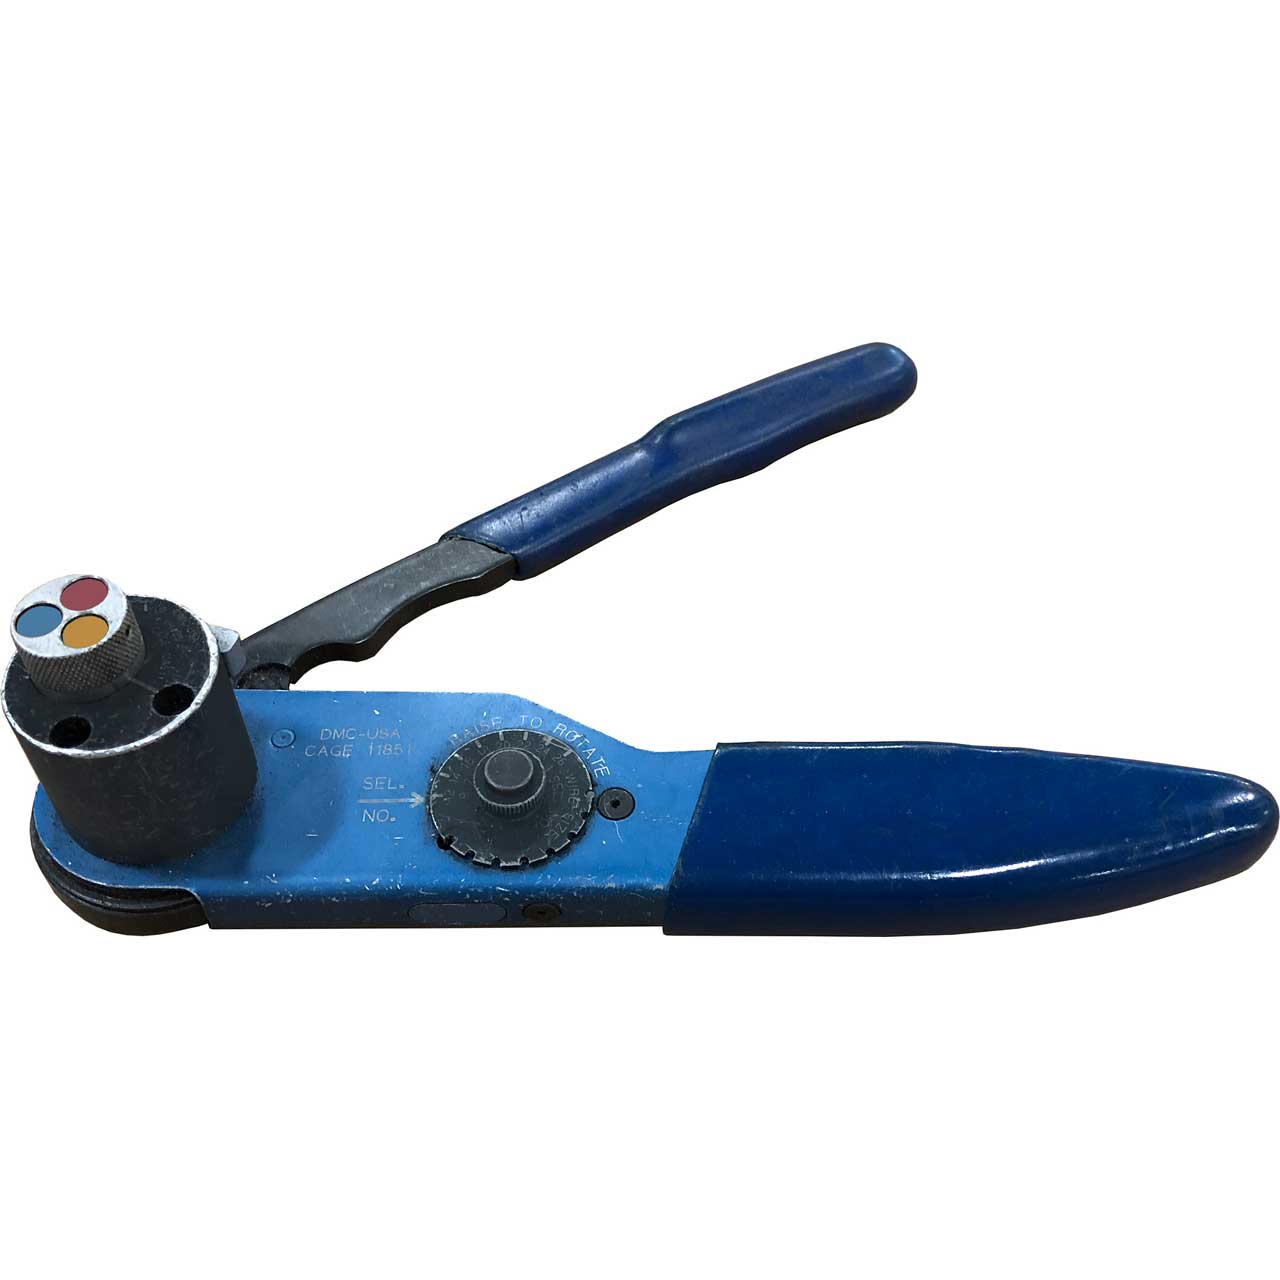 Lex LSC19-CMP Crimping Tool and Turret for LSC19 19-pin Plugs and Connectors LEX-LSC19-CMP